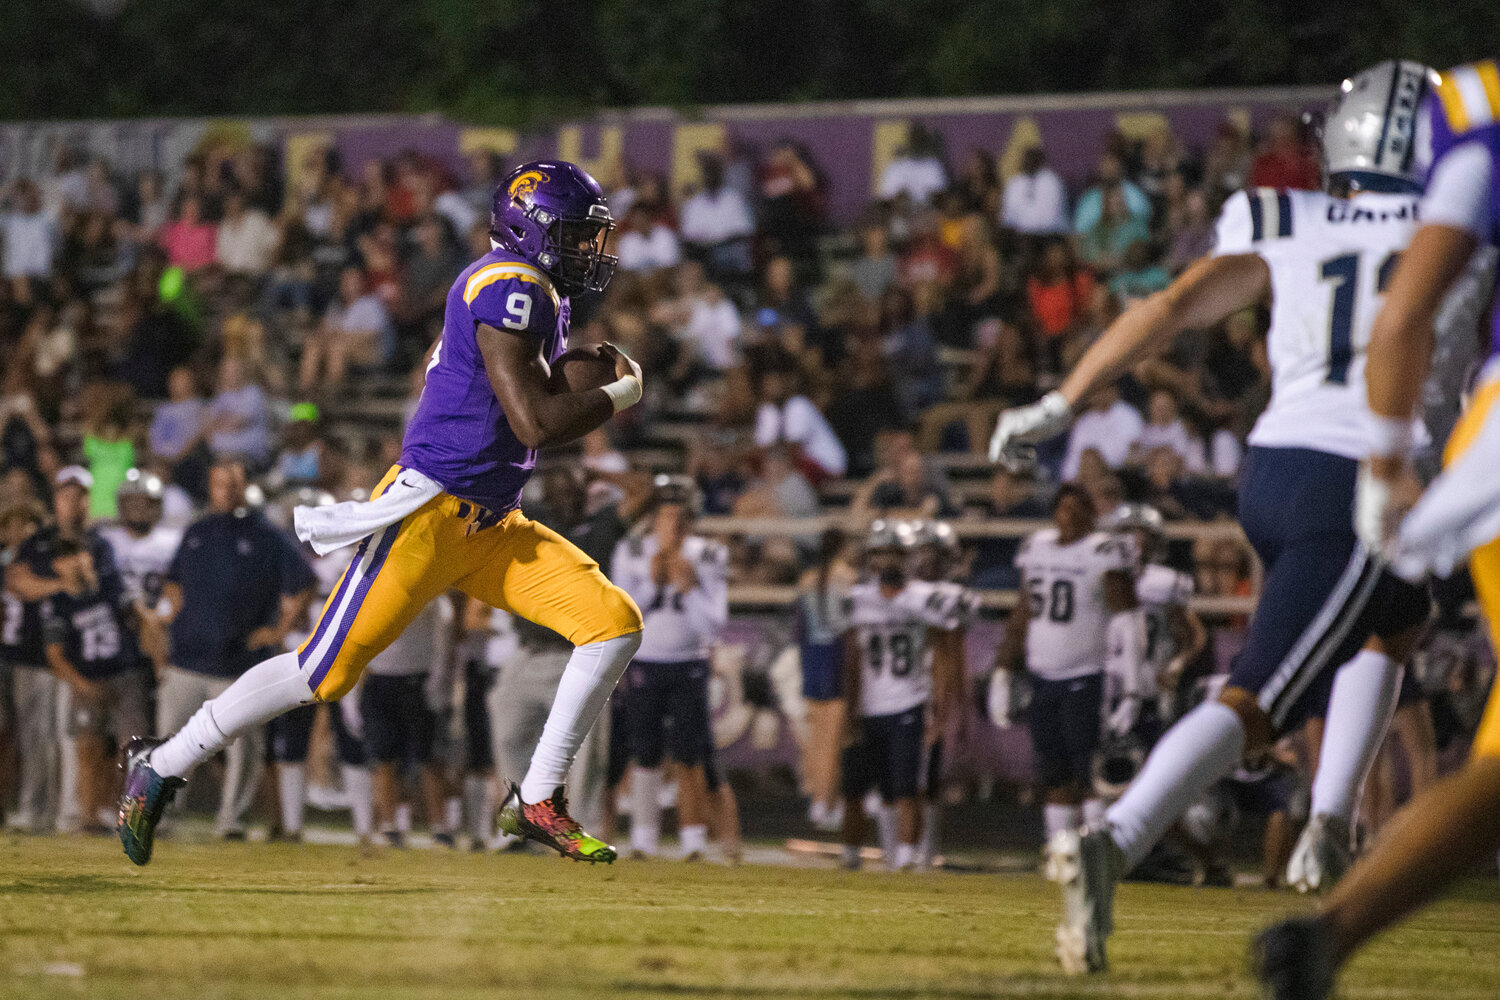 Trojan quarterback Jamar Malone hits the open field on his rushing touchdown that complemented three passing touchdowns to help Daphne open play within Class 7A Region 1 with a 49-35 win over Alma-Bryant at home on Friday, Sept. 8. The Trojans are set to hit the road on Friday to face the Davidson Warriors.